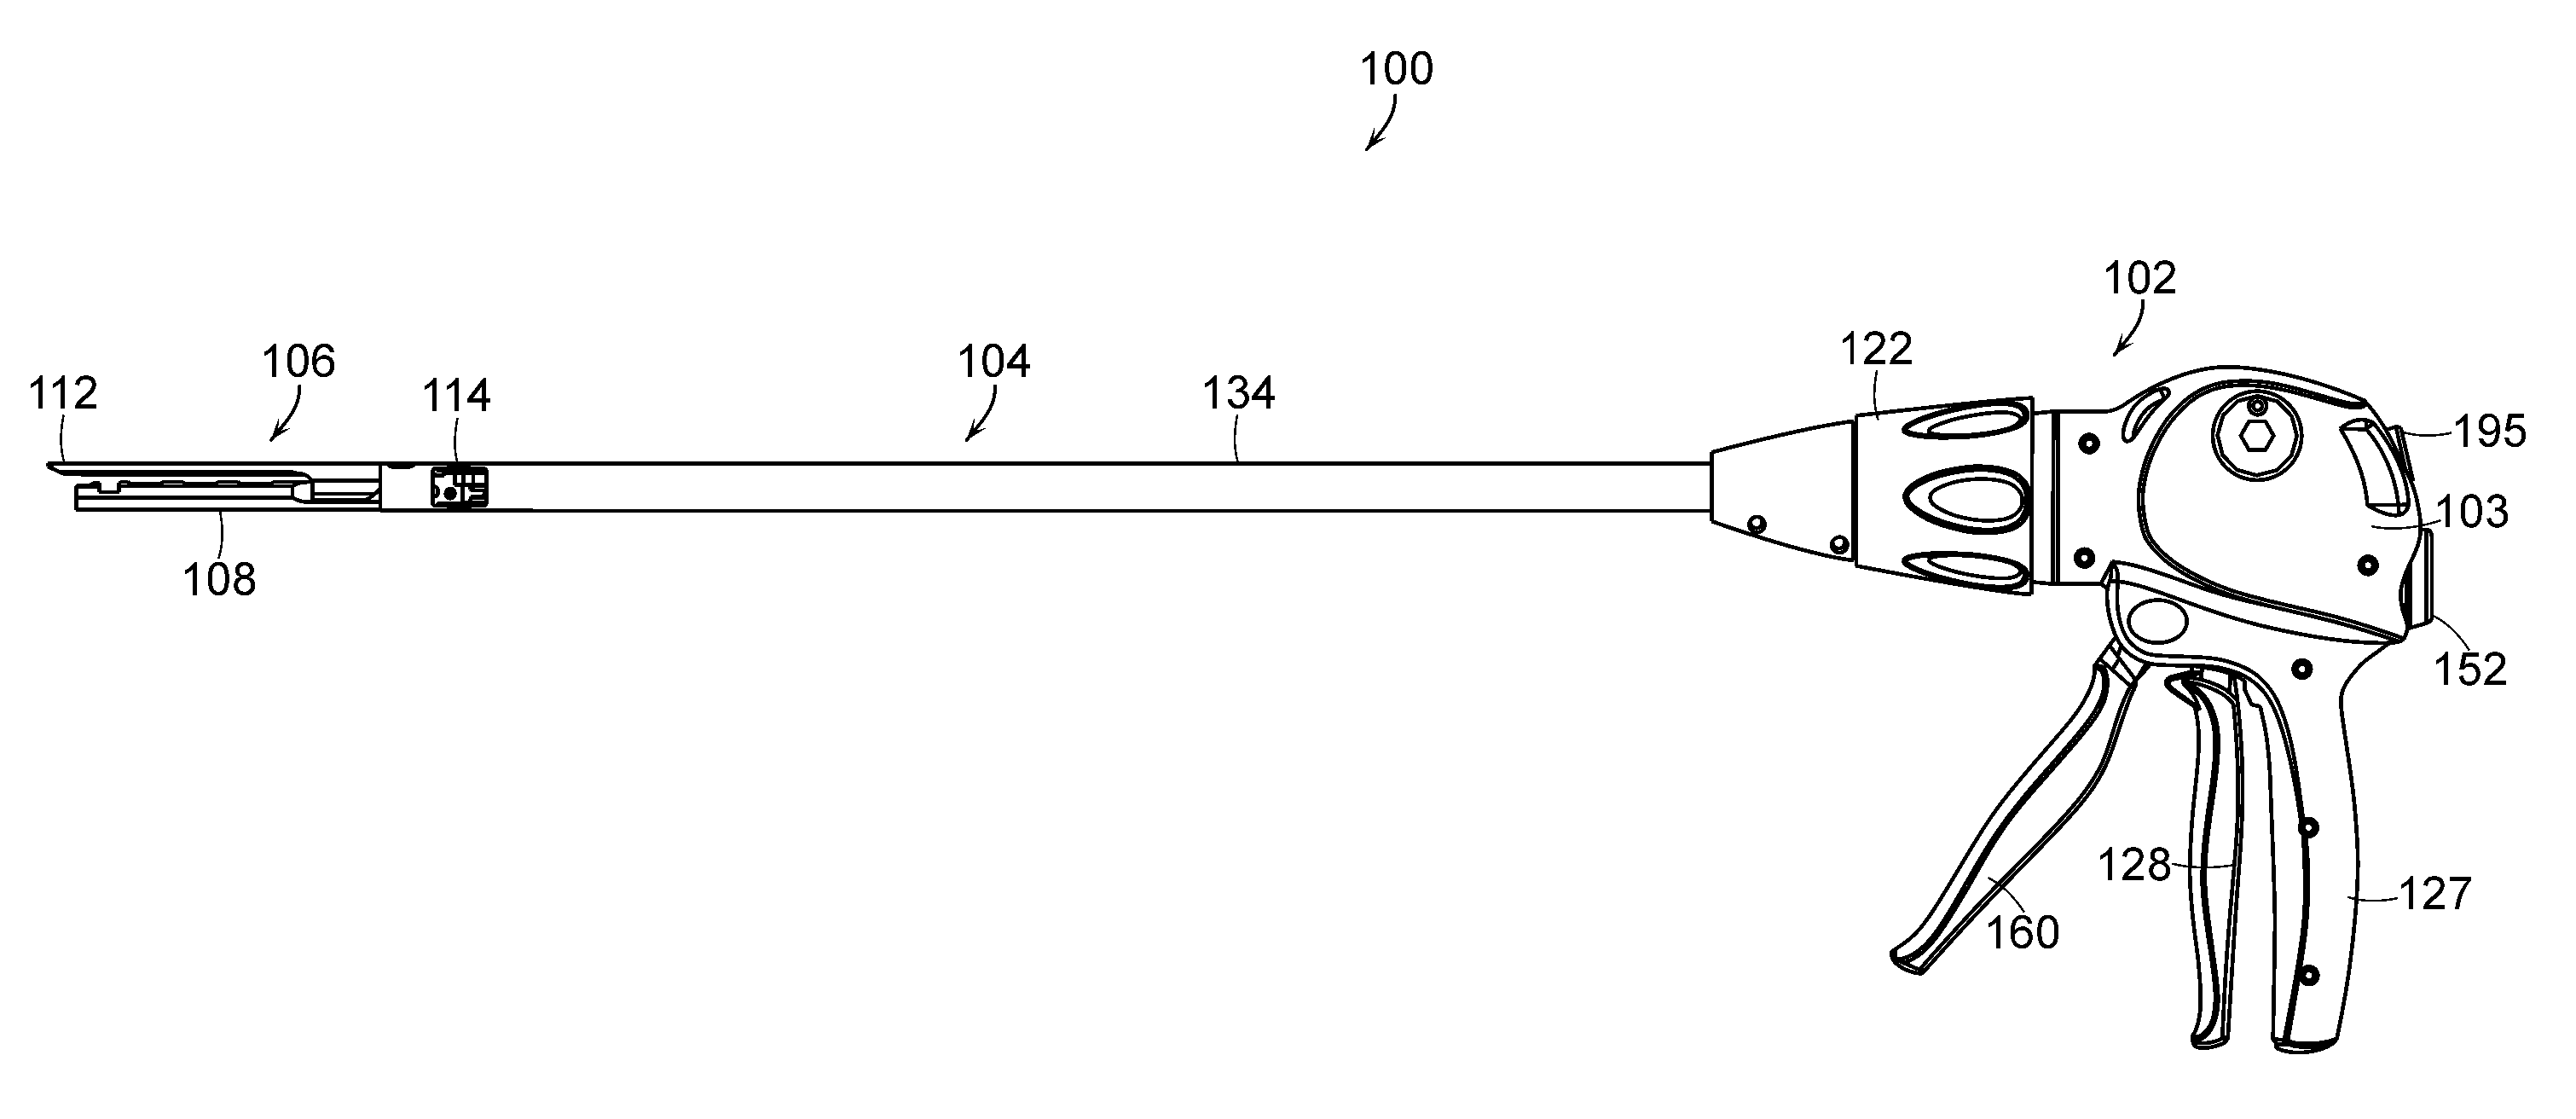 Surgical stapling instrument with an artculating end effector